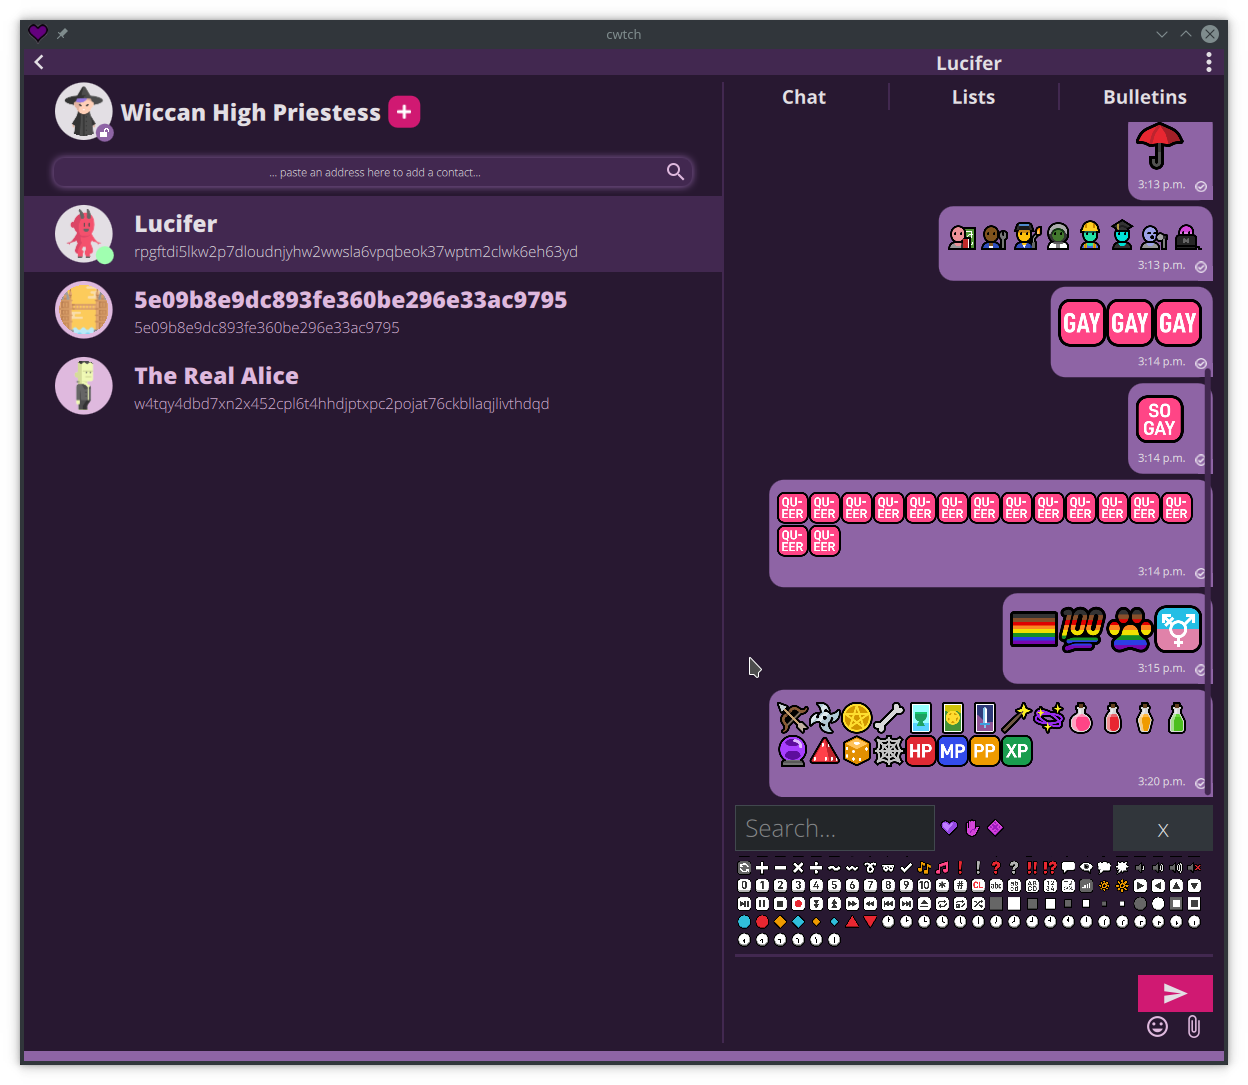 Screenshot of the Cwtch alpha, Qt version. It depicts the newly designer user interface in a partially implemented earlier state, and the developer has been testing integration with the Mutant Standard emoji set in the message area.